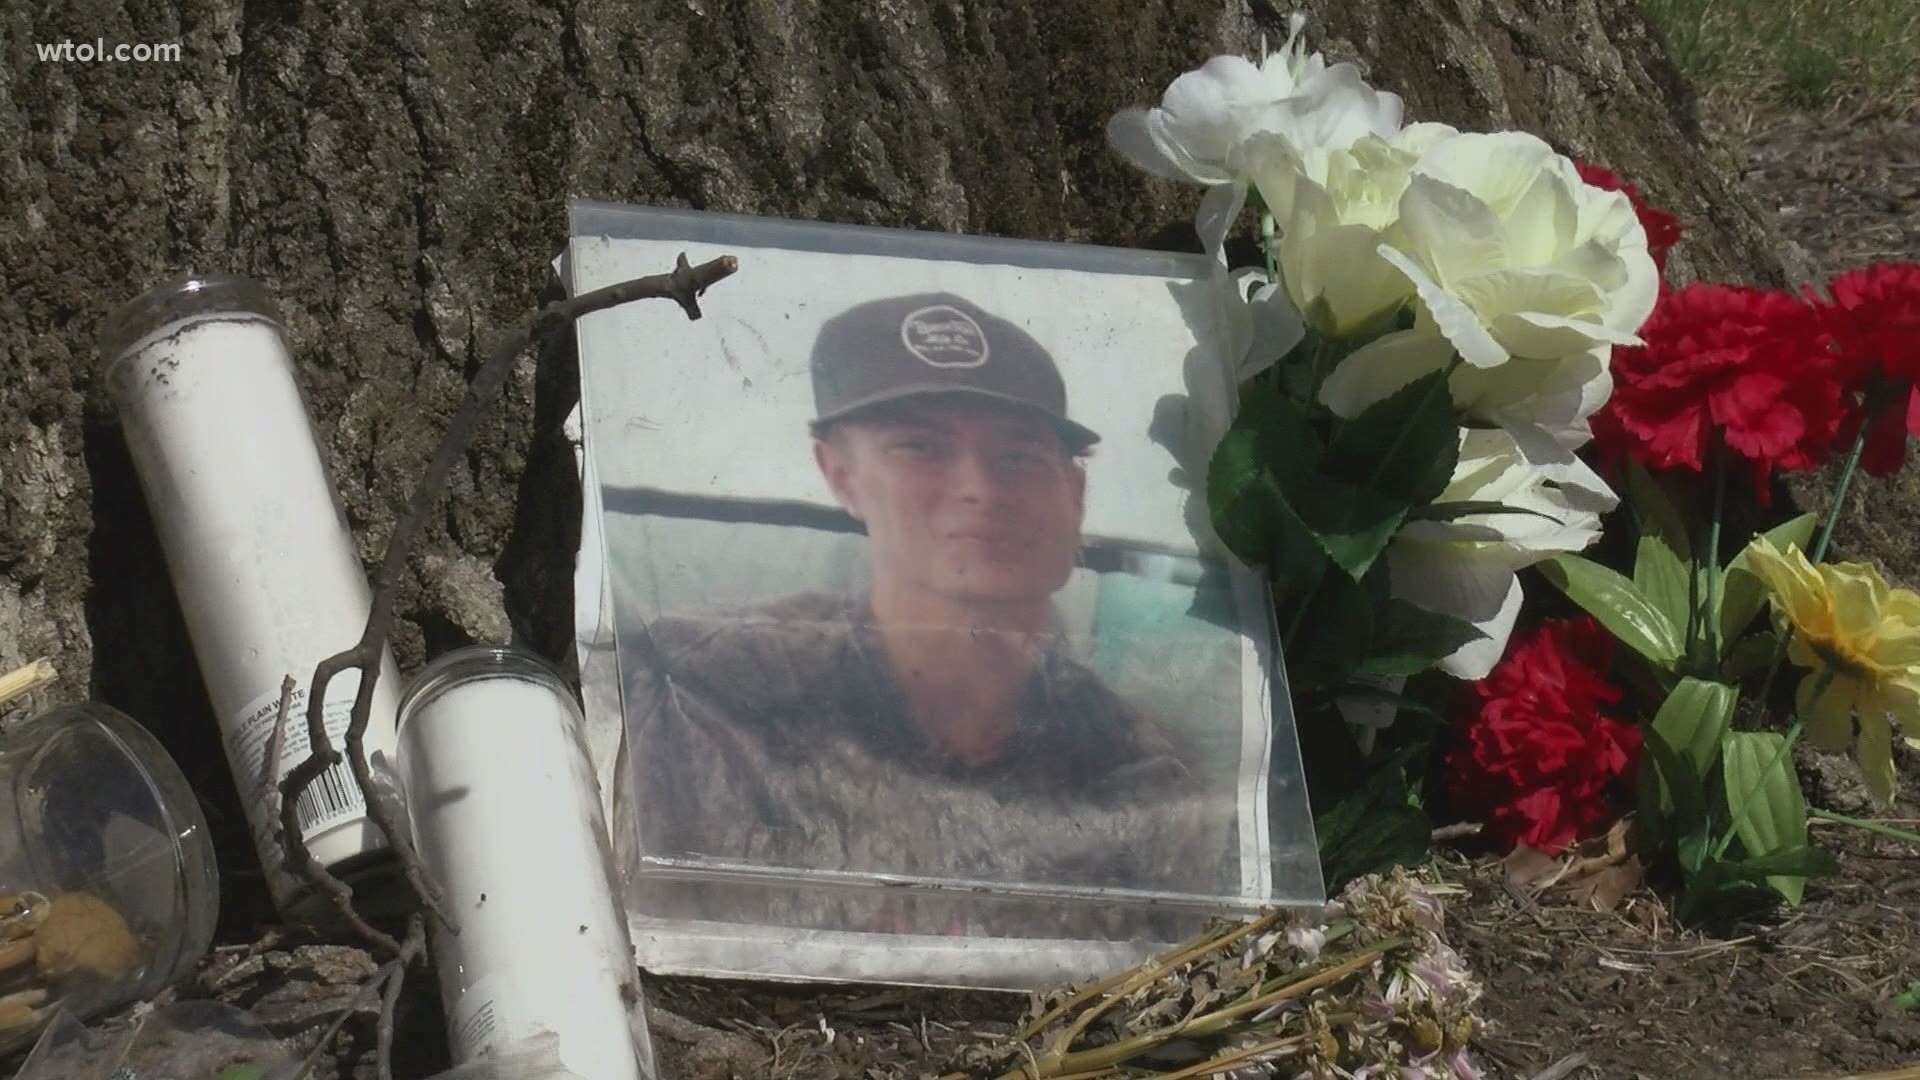 With the cause of Stone Foltz's death ruled an accident, what could come next legally in the case?